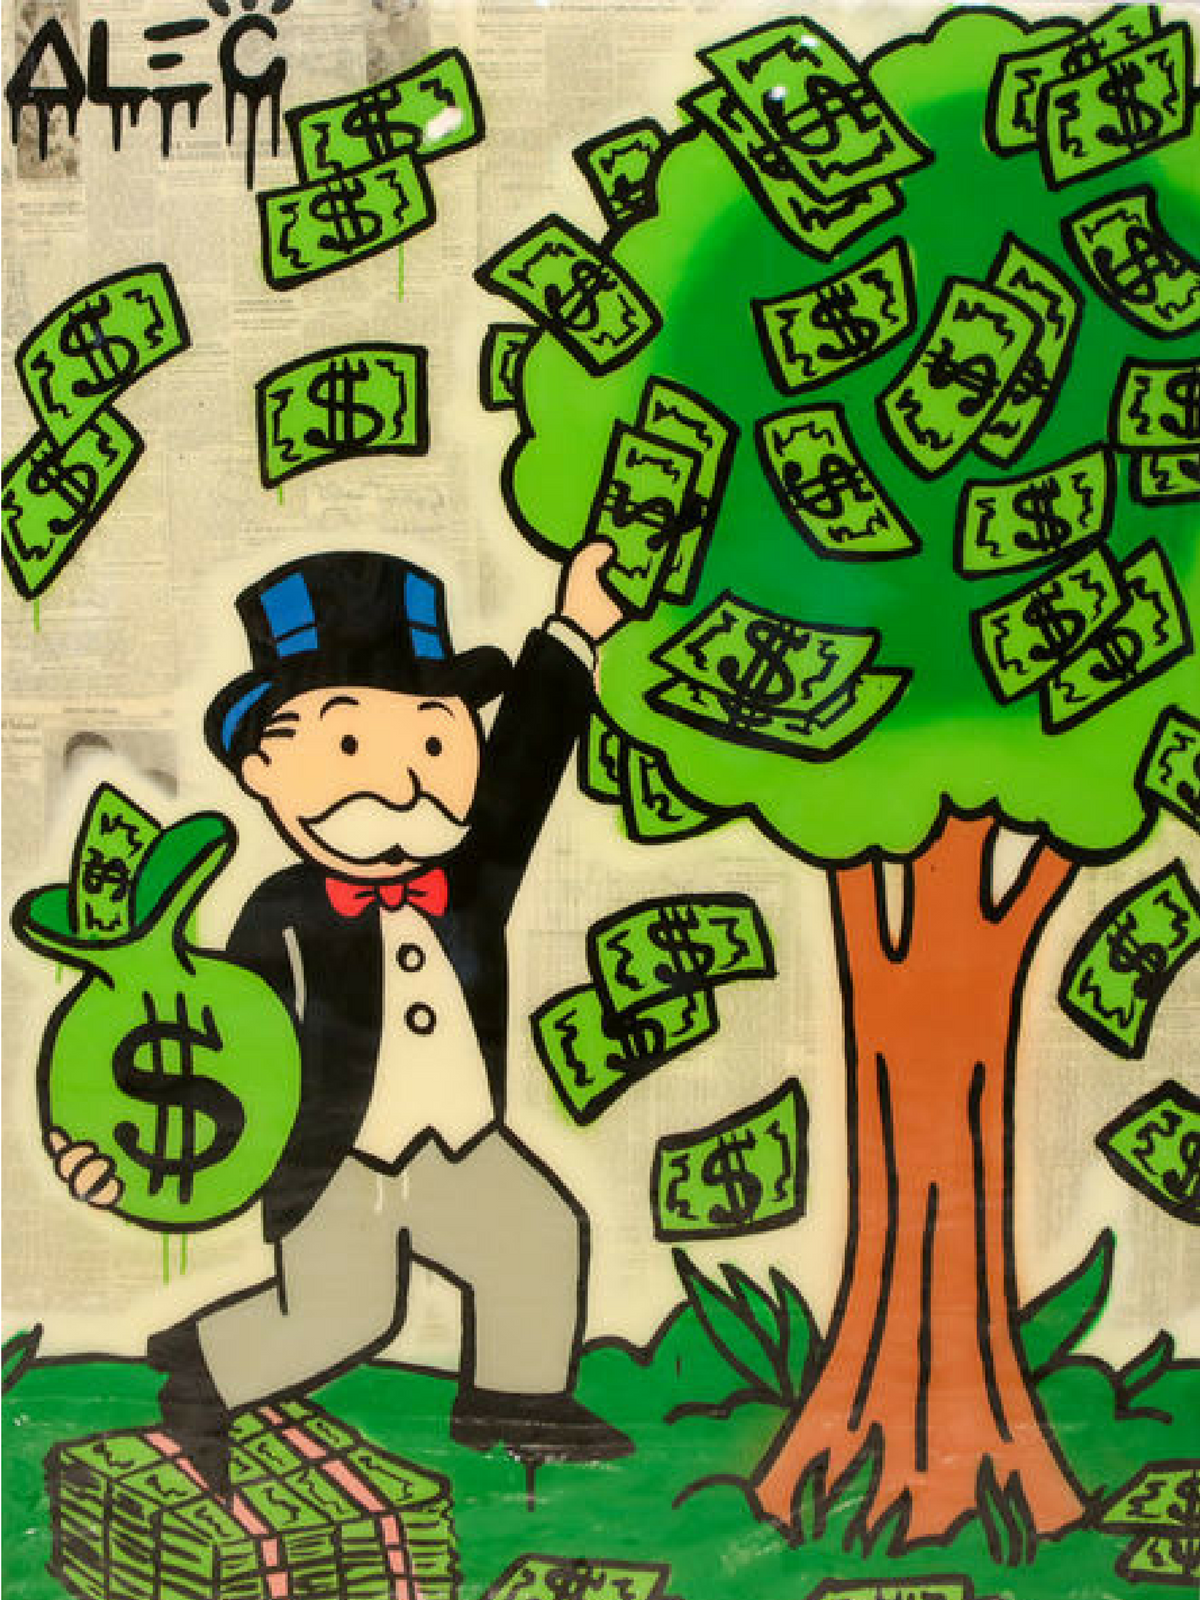 Alec Monopoly- Tree of Life, Original Mixed Media Painting on Canvas. #canvasart #painting #mixedmediaart #treeoflife #mo. Pop art painting, Pop art, Art painting